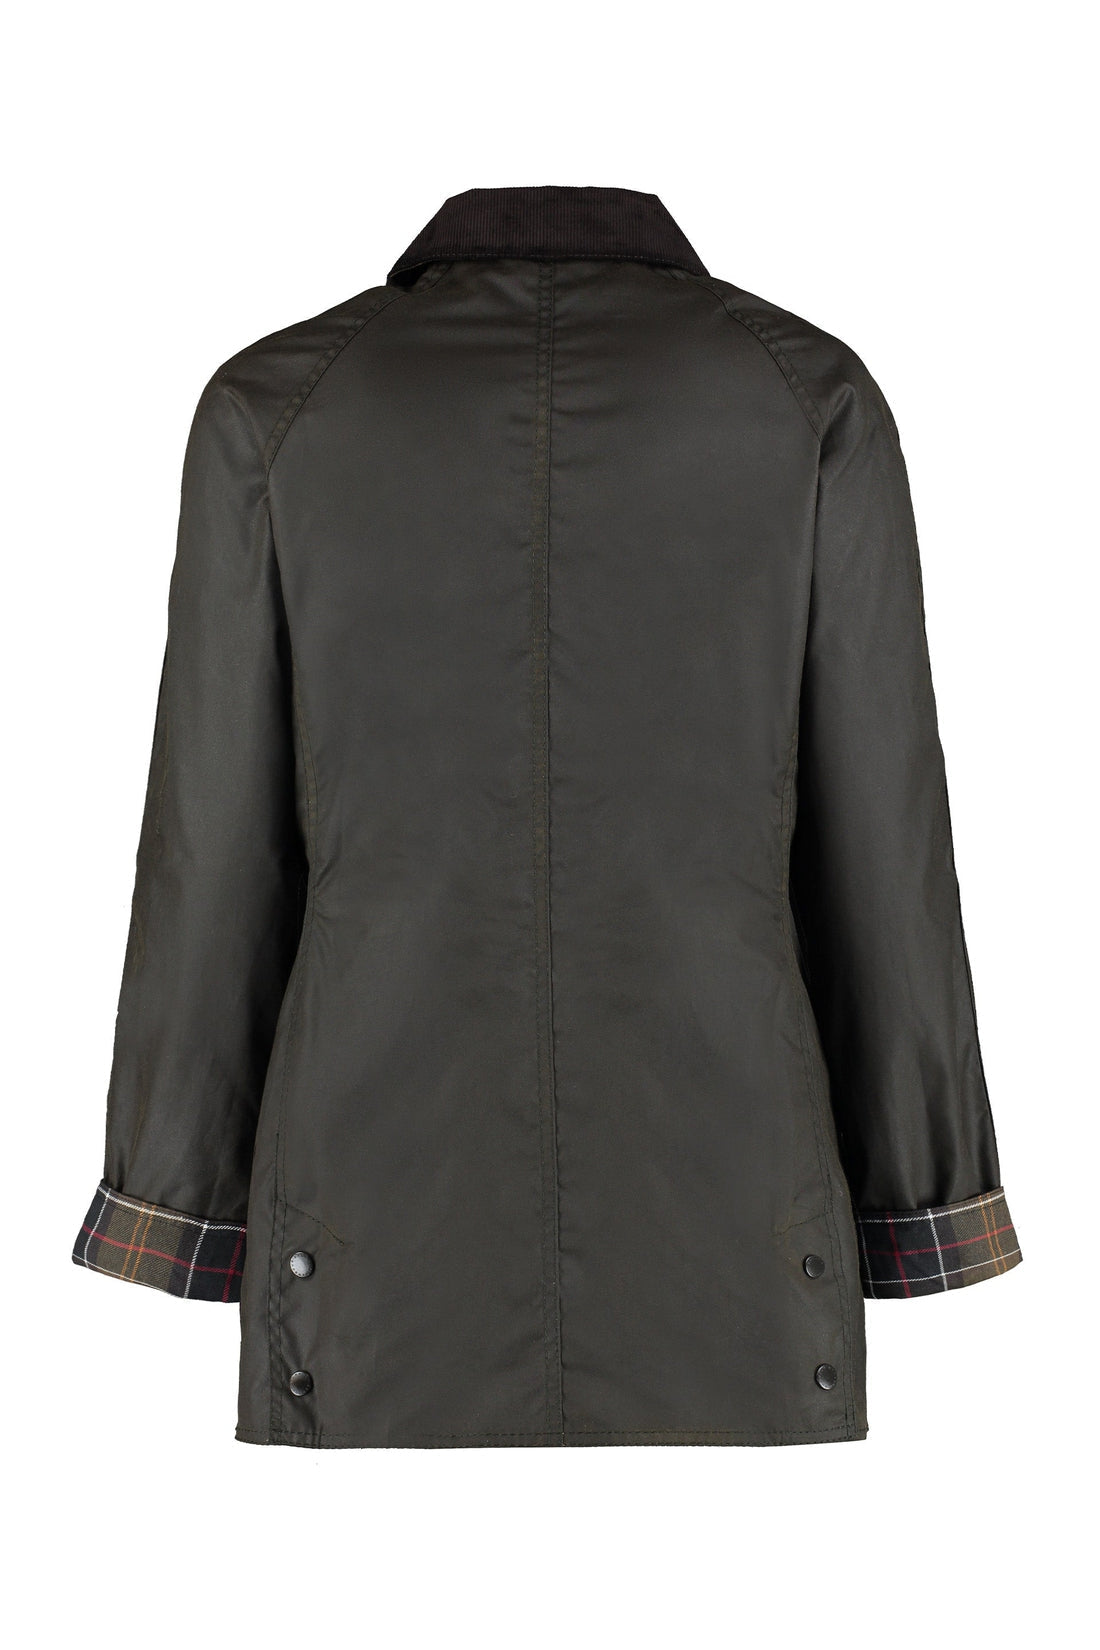 Barbour-OUTLET-SALE-Beadnell coated cotton jacket-ARCHIVIST